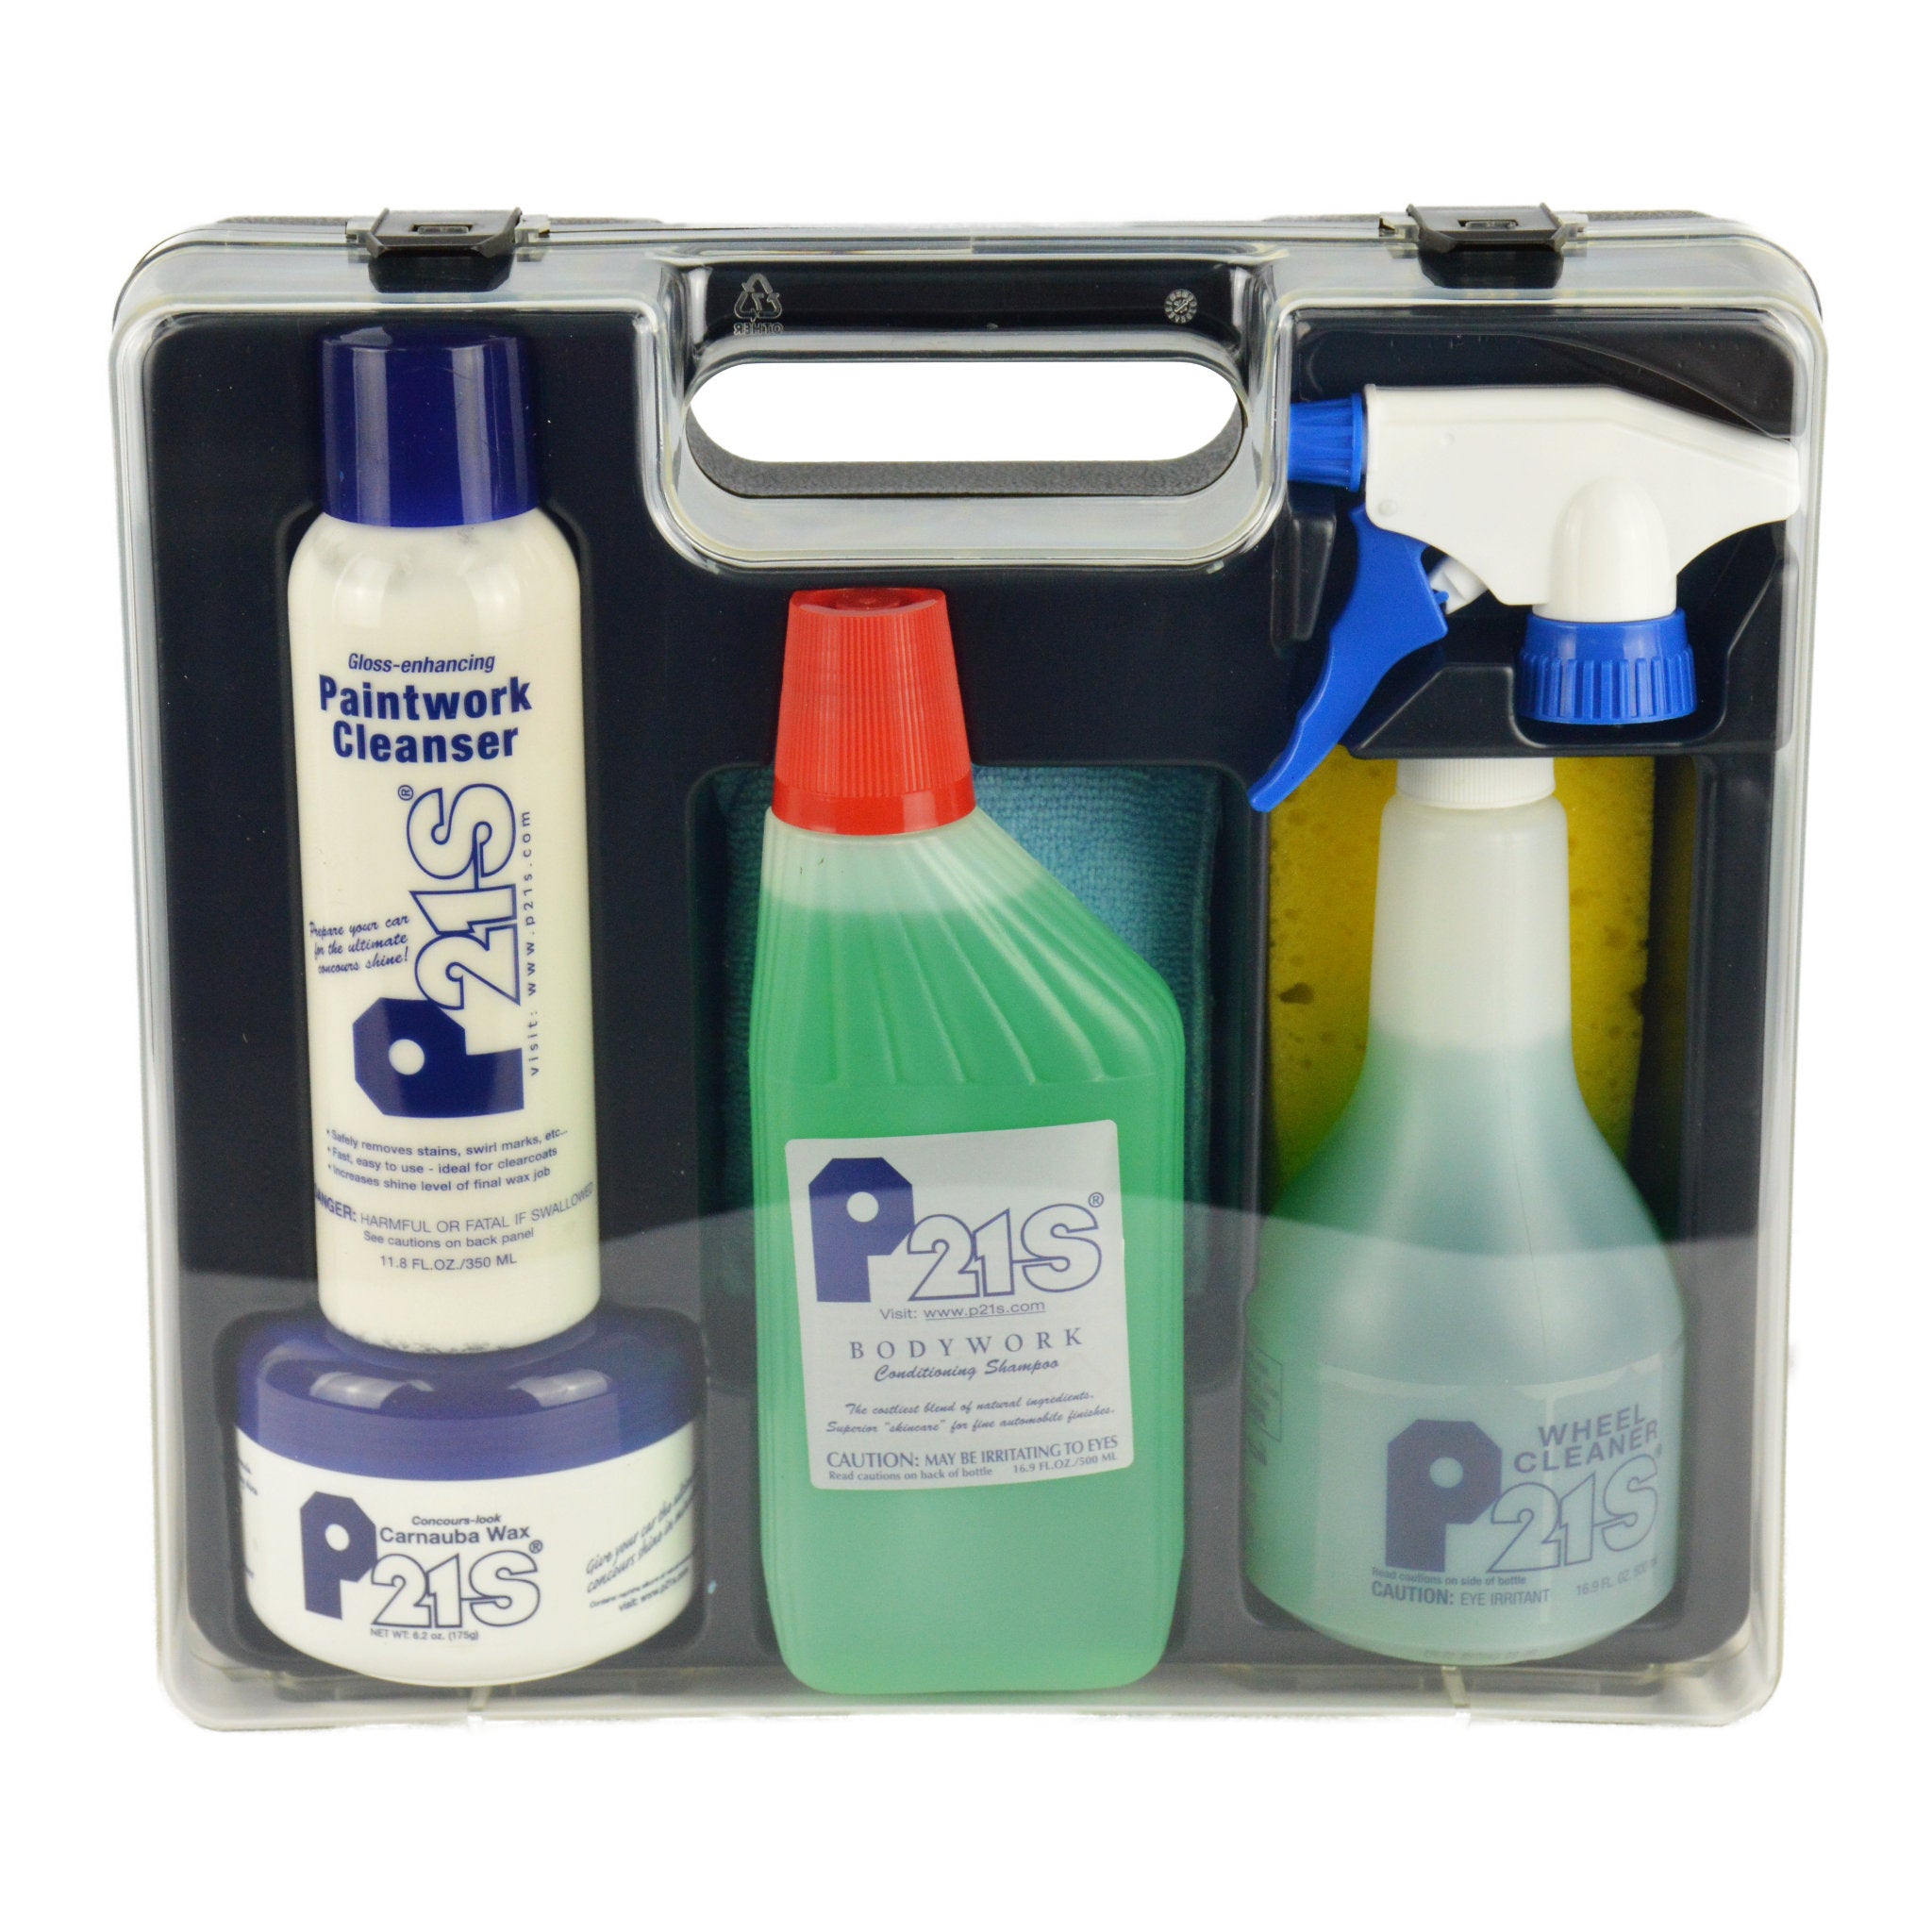 P21S Gloss-Enhancing Paintwork Cleanser - P21S Auto Care Products